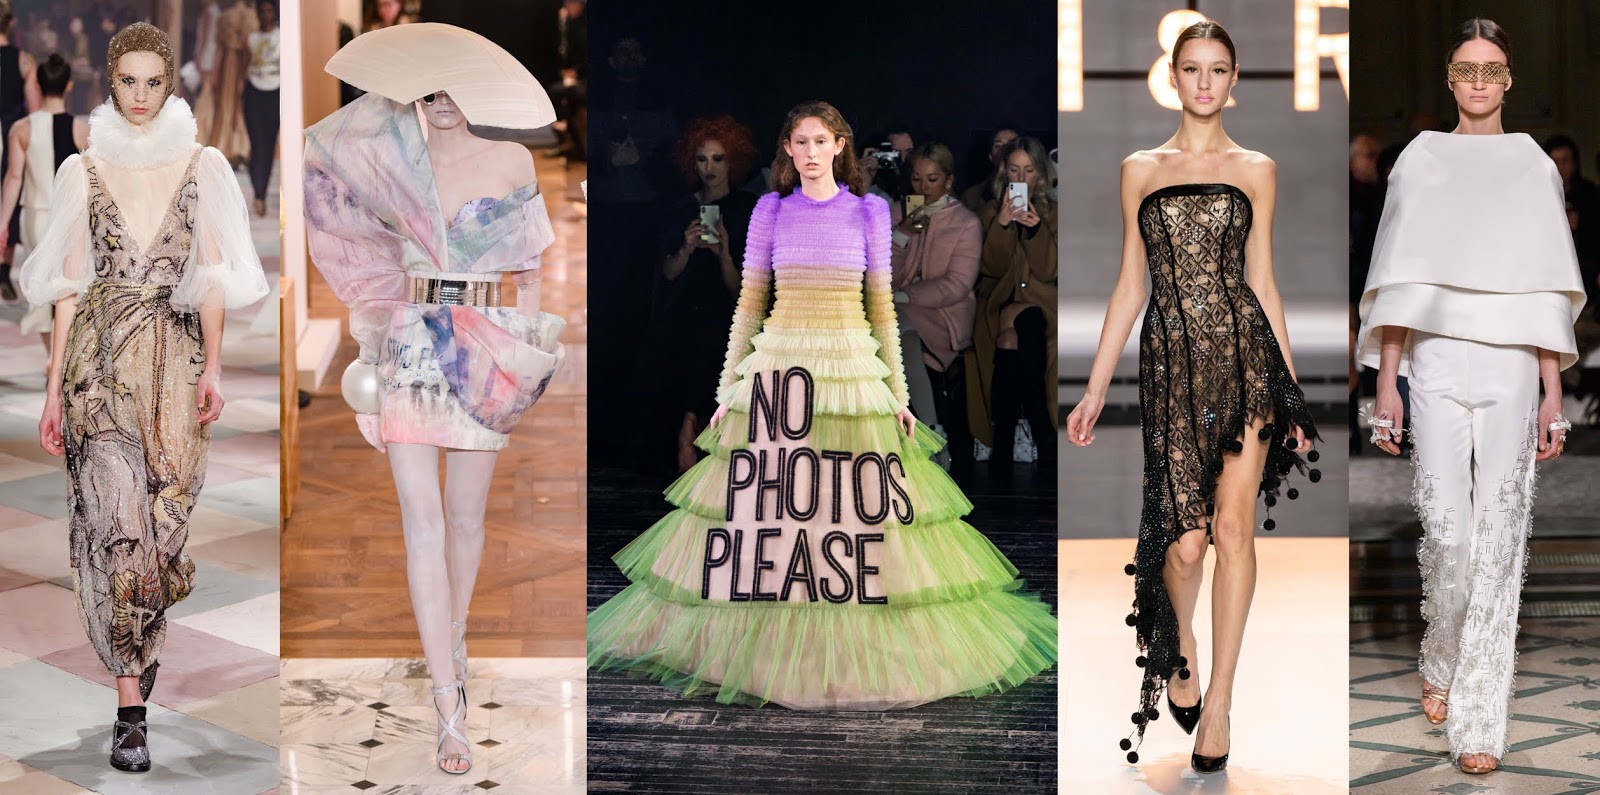 Chanel Runway Dress; Easier Than You Think – Cloning Couture